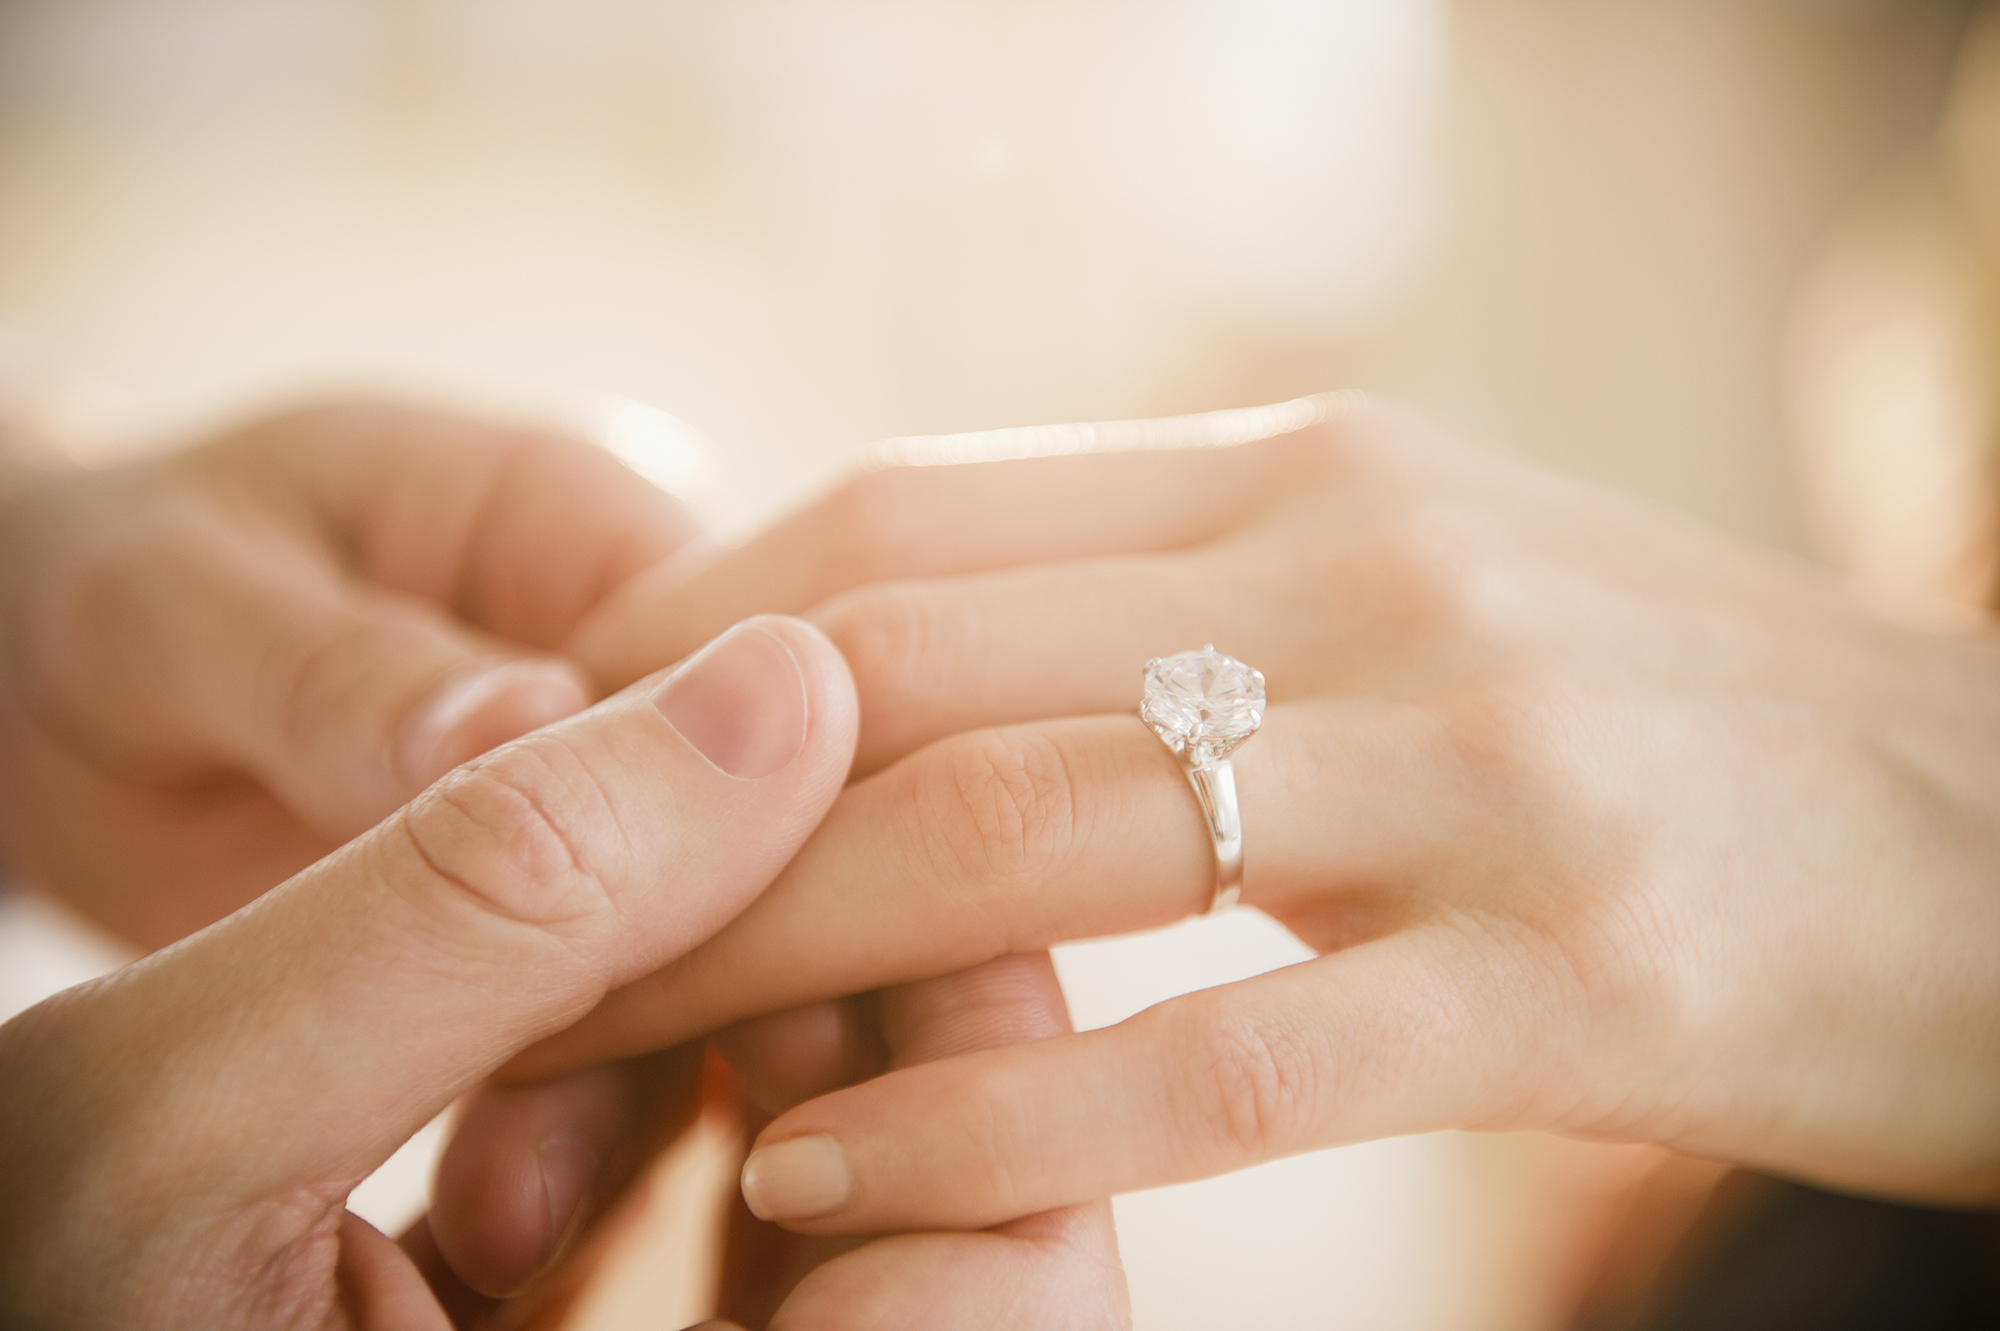 USA, New Jersey, Jersey City, Close up of man's and woman's hands with engagement ring